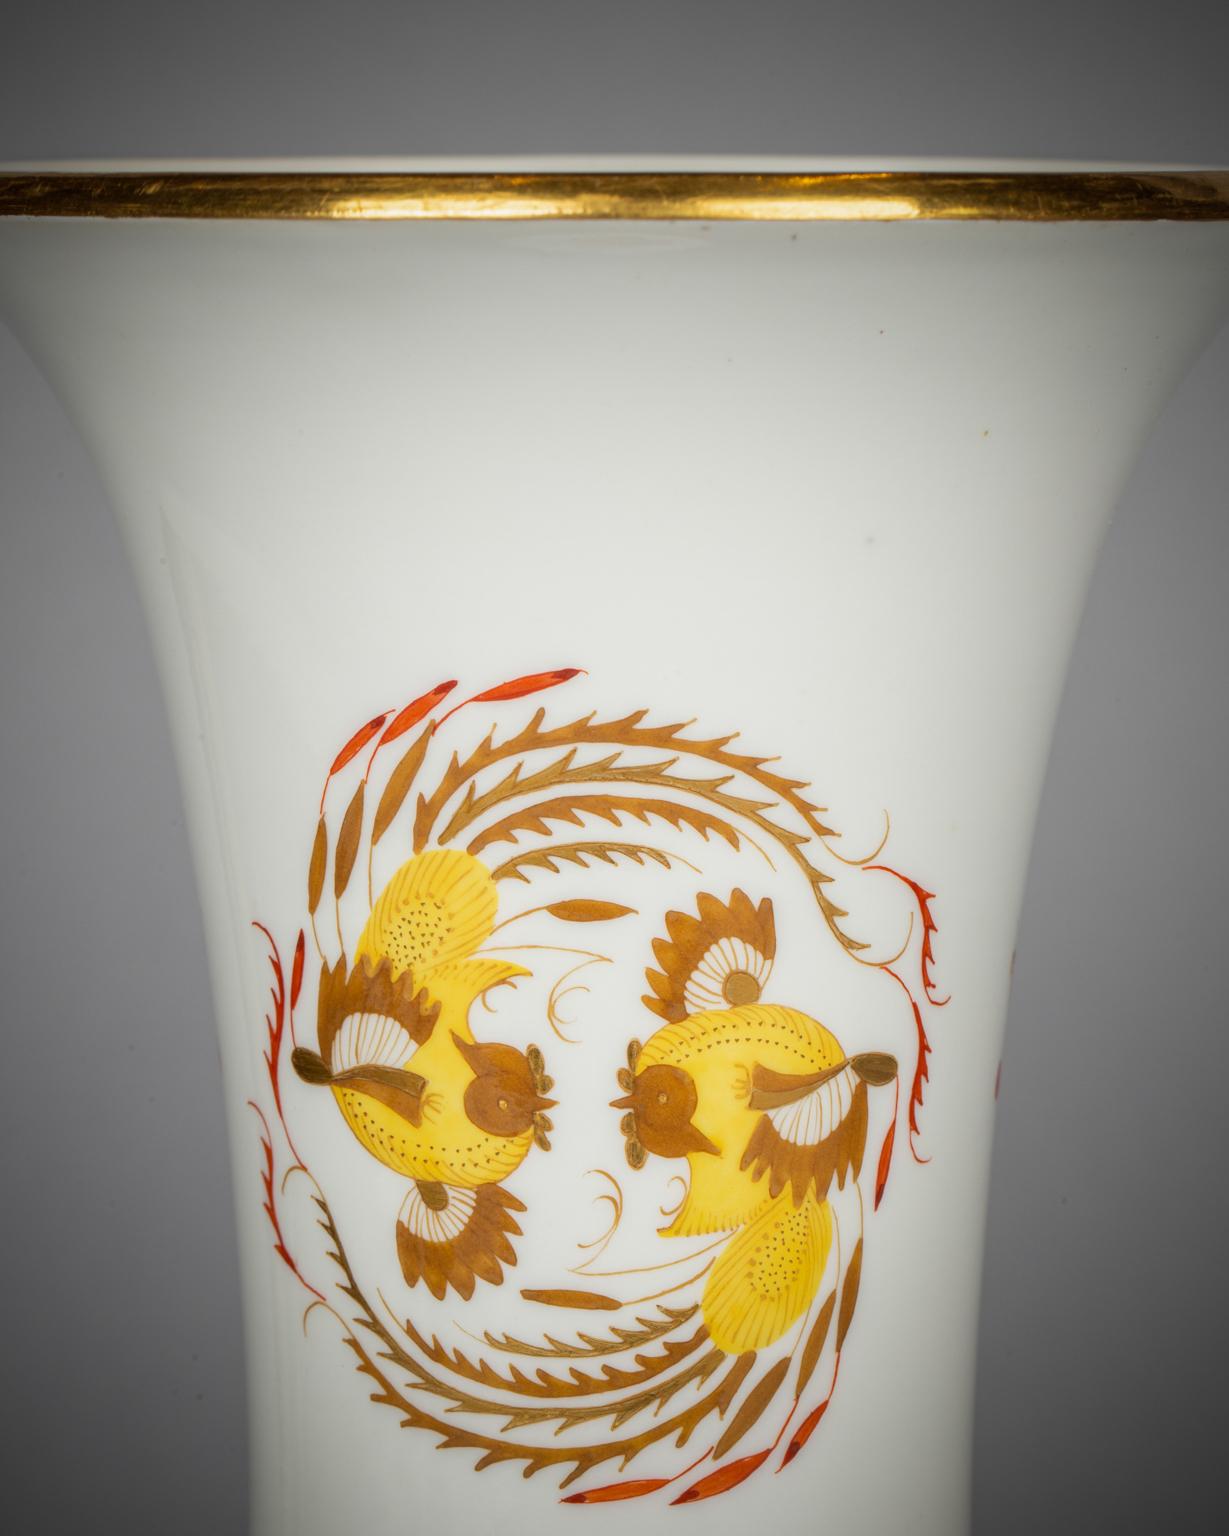 One vase painted with yellow dragon and phoenixes, the other painted with blue dragon decoration.